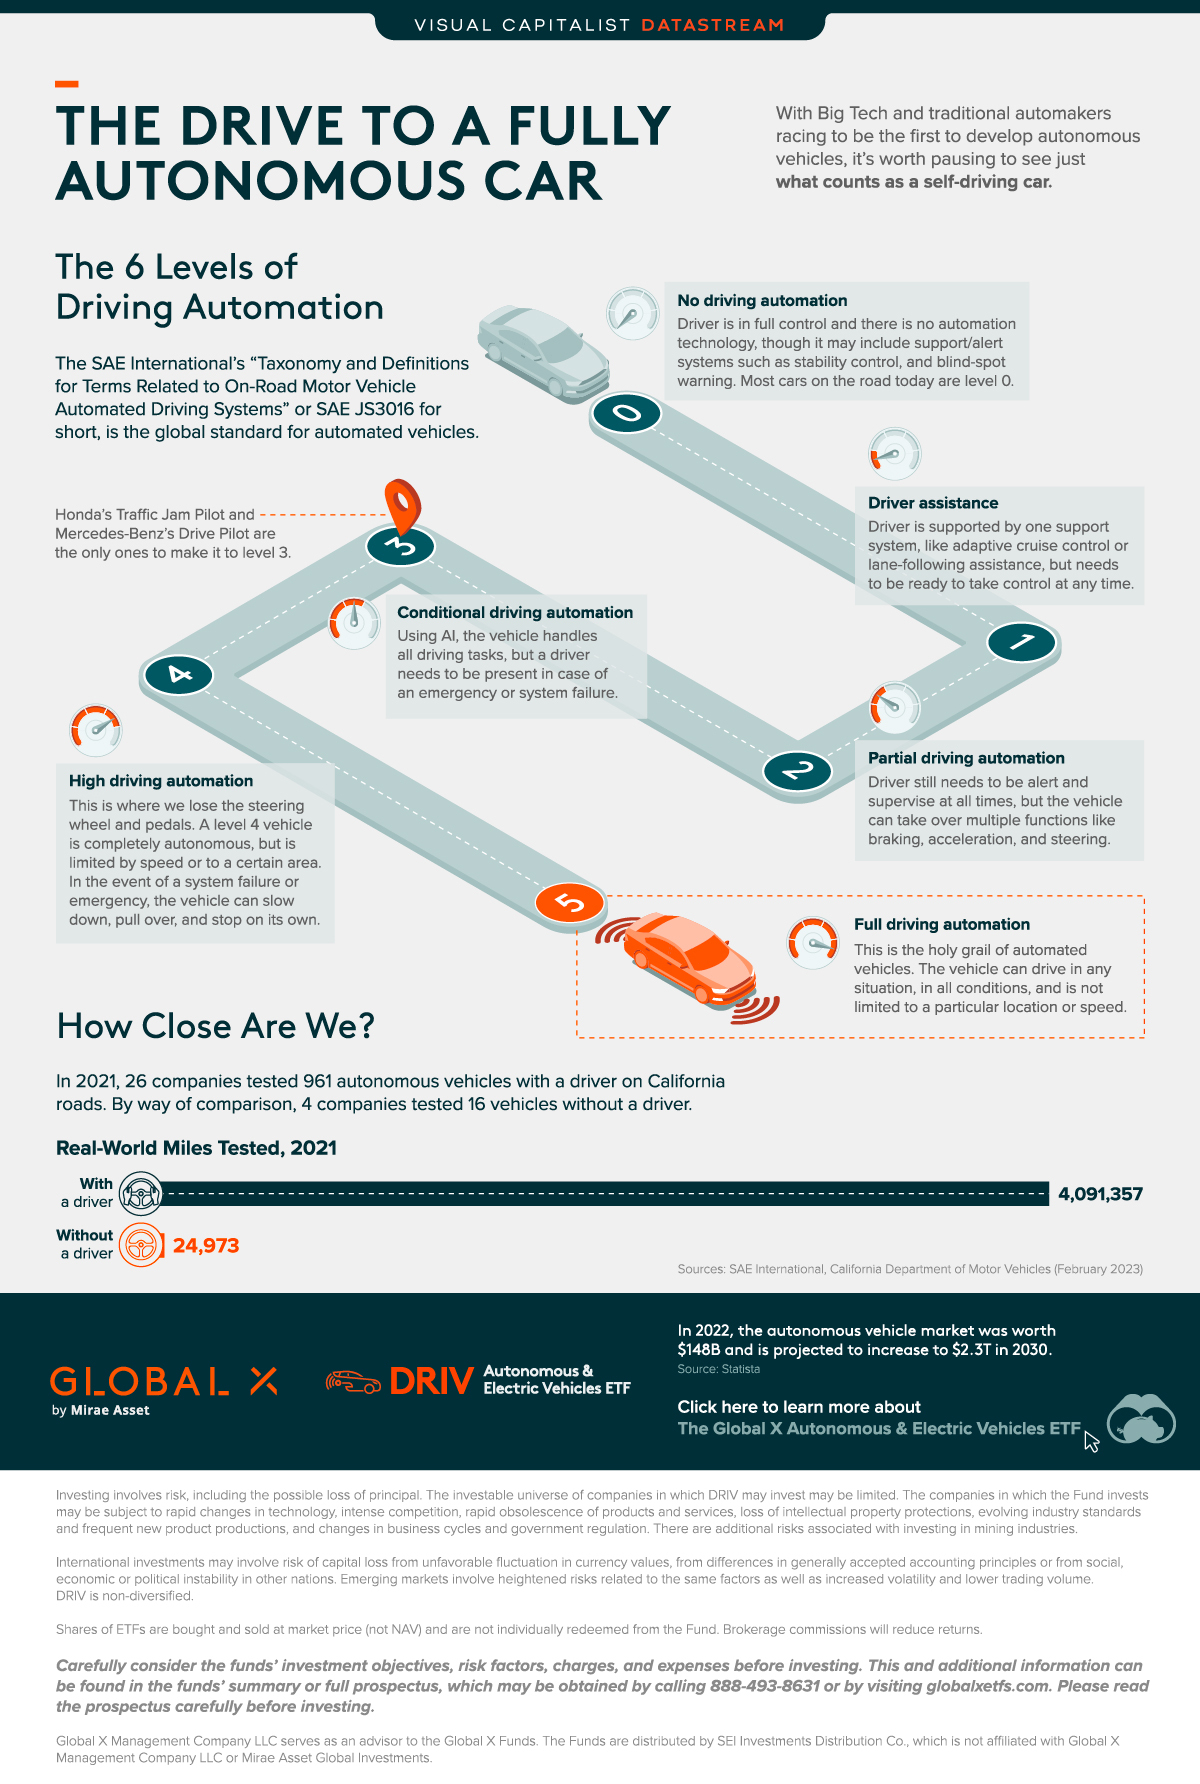 Infographic showing SAE International's six levels of driving automation